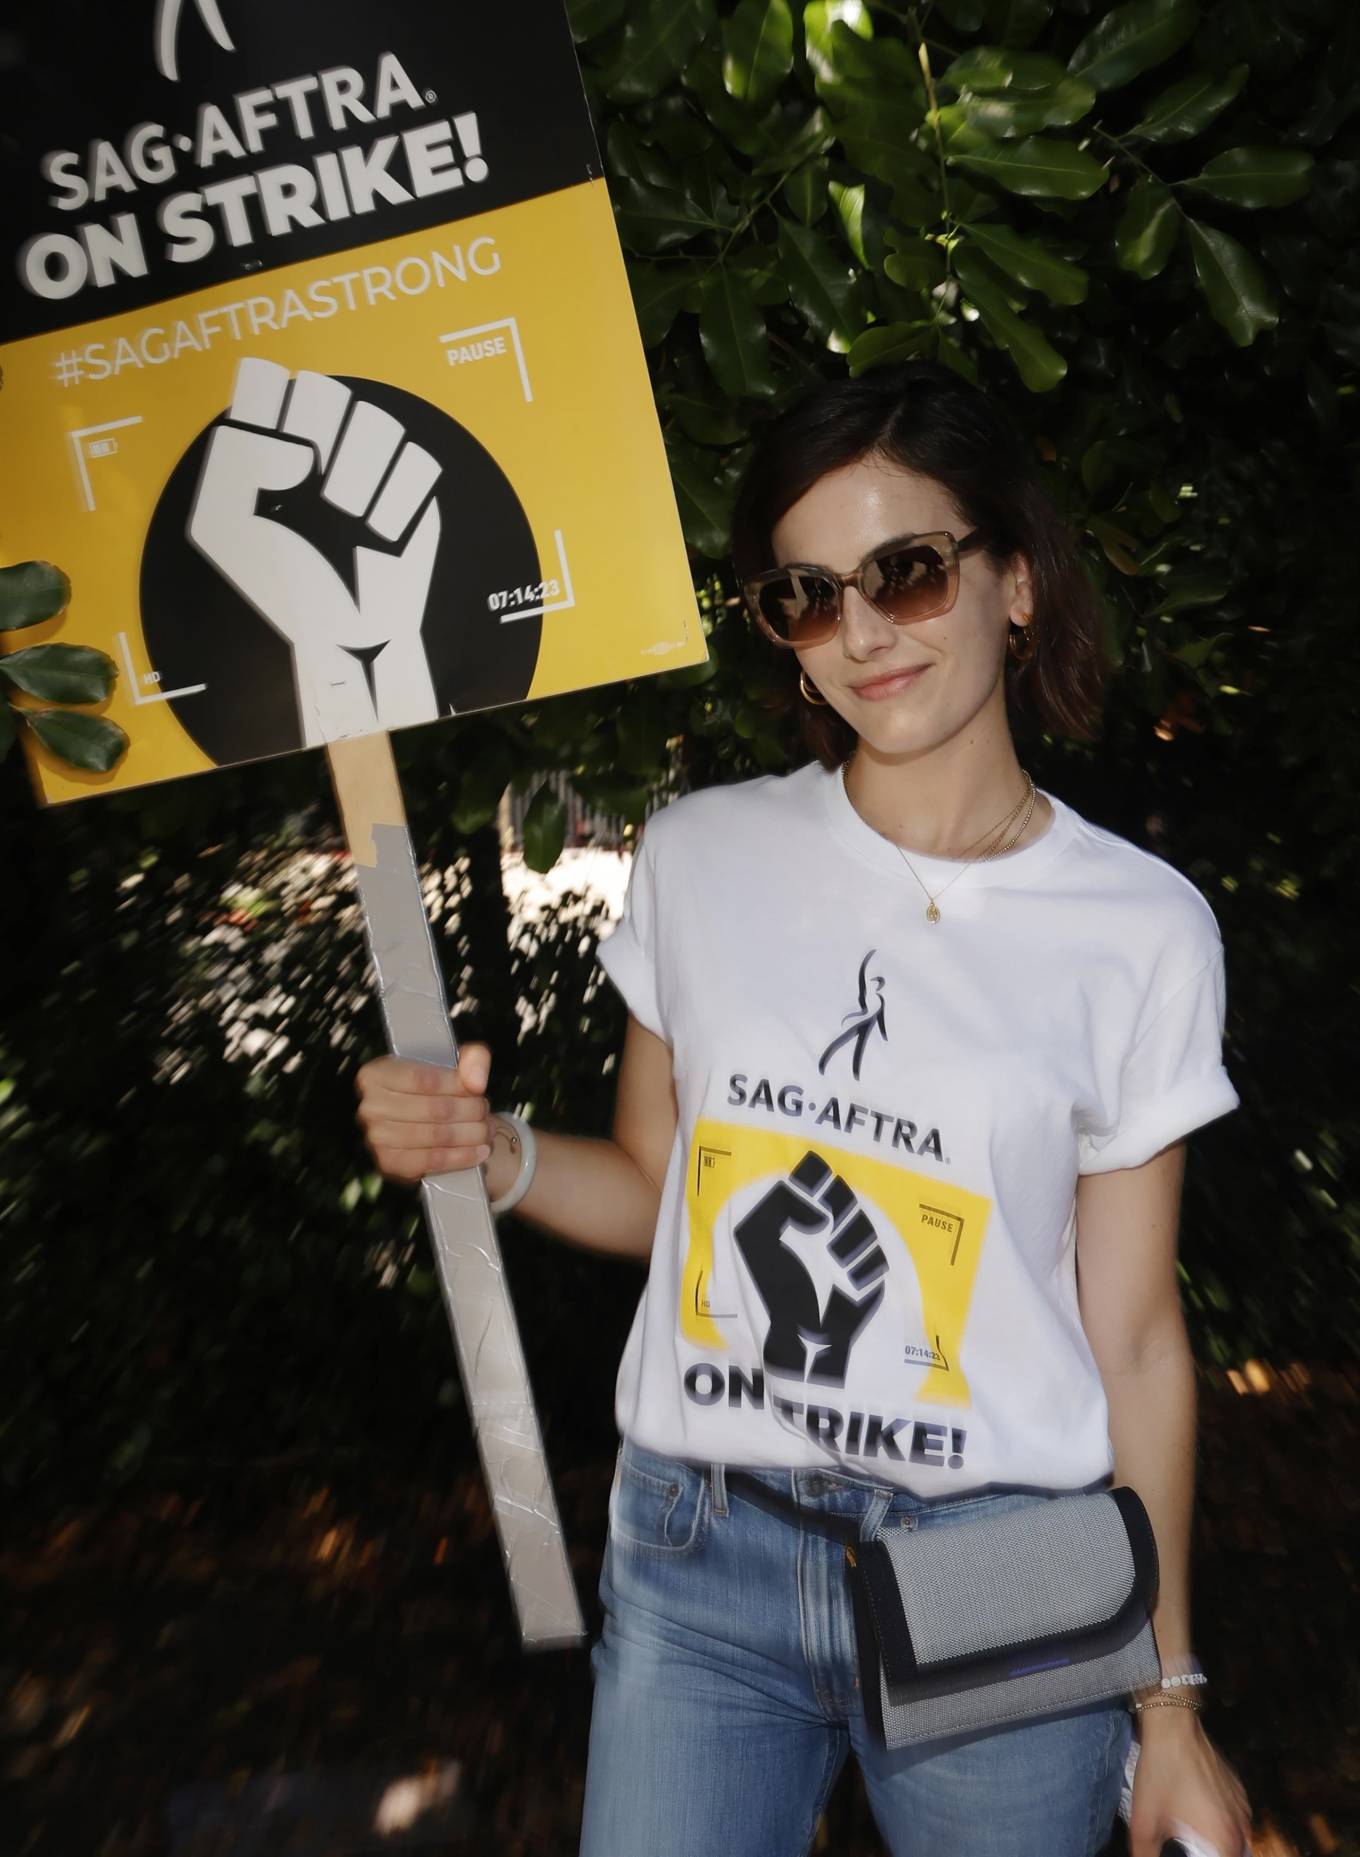 Camilla Belle - Pictured at the SAG-AFTRA and WGA Strike in Burbank